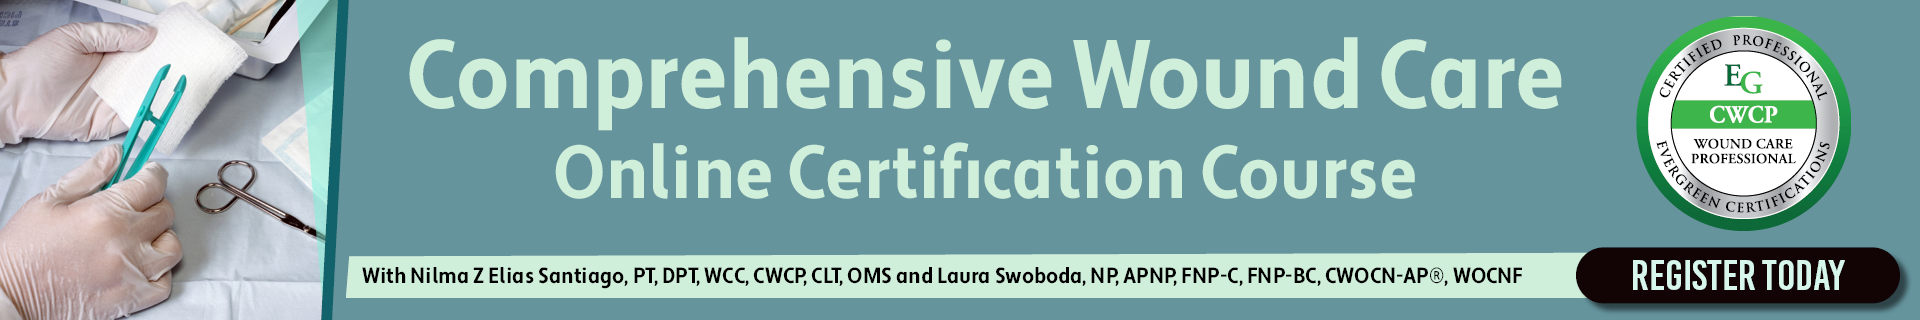 Comprehensive Wound Care Certification Course